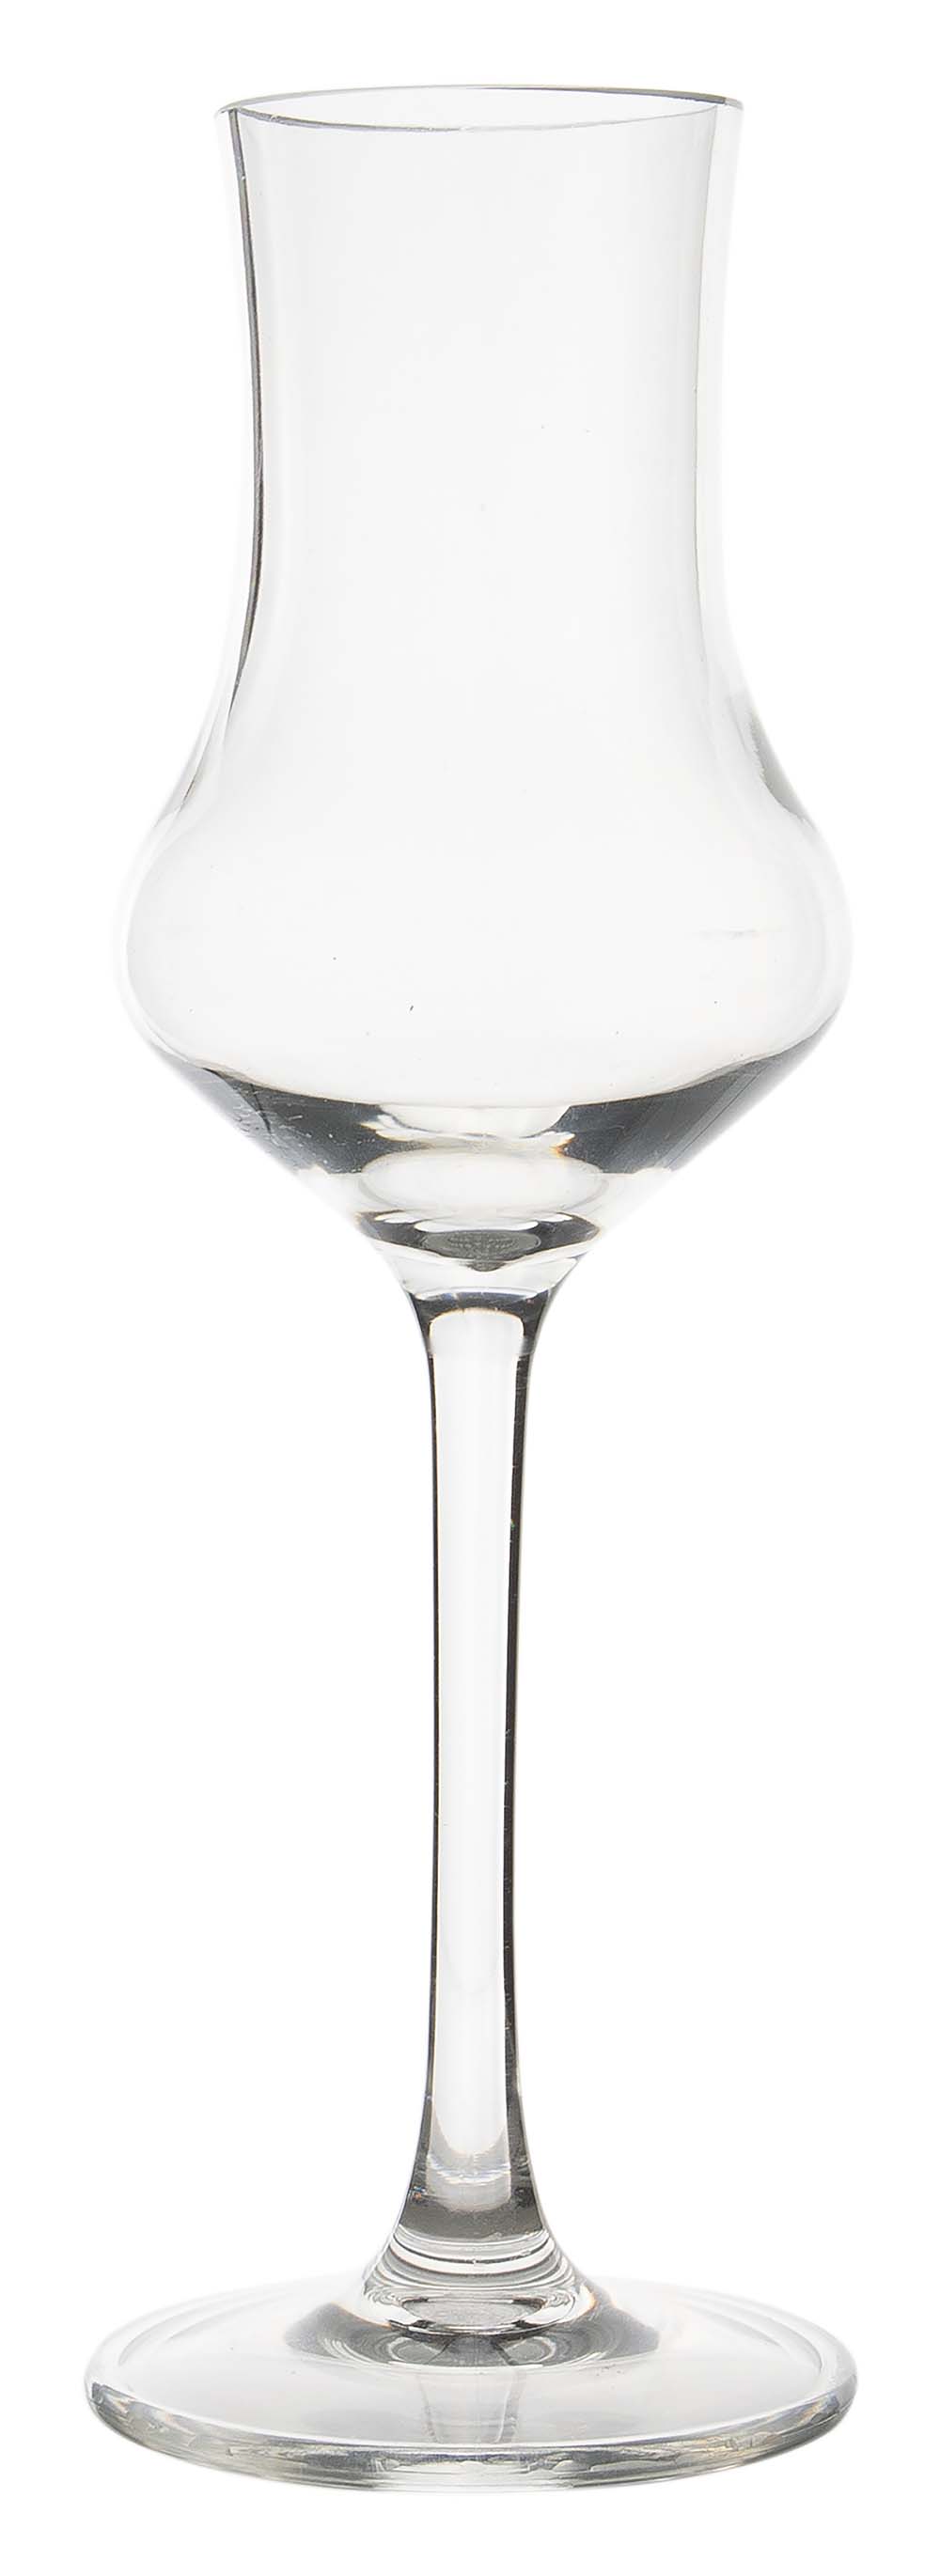 6911165 A grappa glass from the Royal line collection. Virtually unbreakable due to high quality MS material. Consists of a set of 2 pieces. Very easy to clean and long lasting, which makes the glass very durable. In addition, the grappa glass is lightweight and scratch resistant. Capacity: 100 ml.